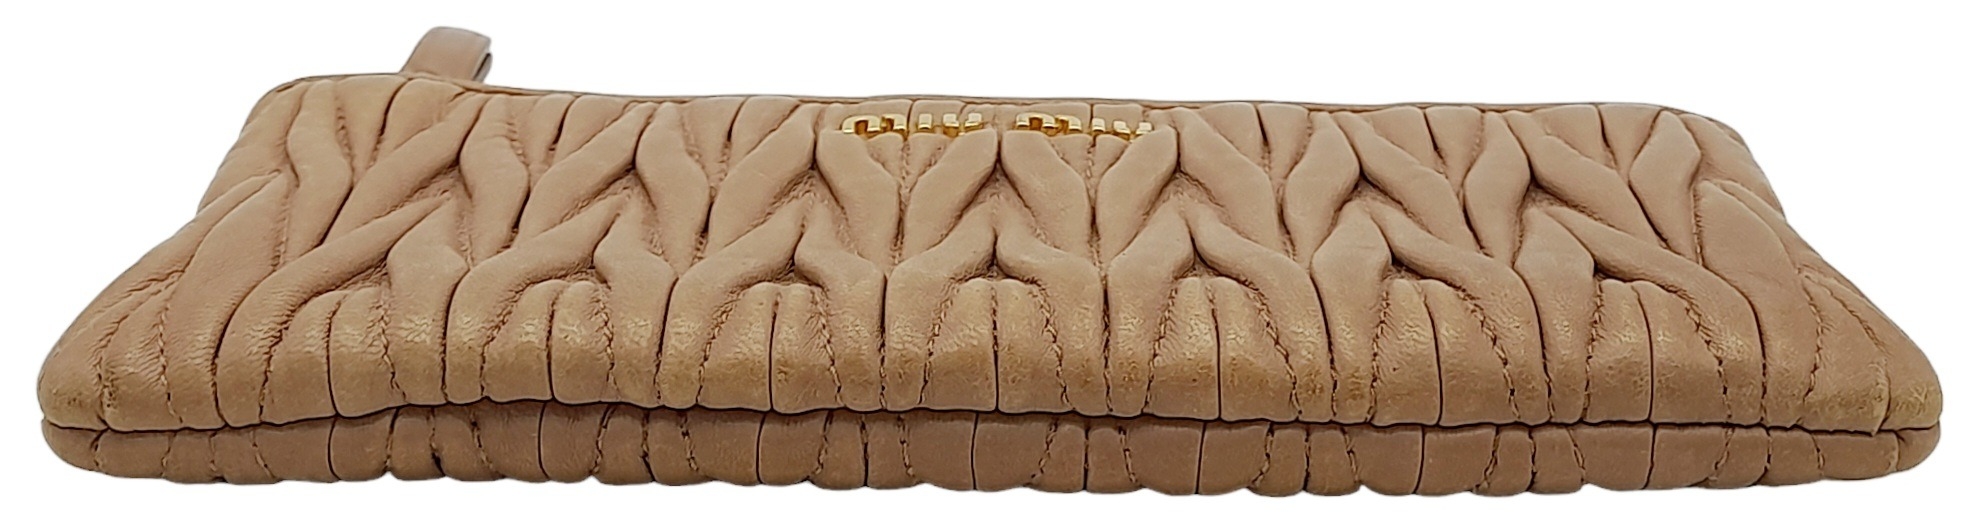 A Miu Miu Dust Pink Purse. Matelassé leather exterior with gold-toned hardware and zipped top - Image 7 of 10